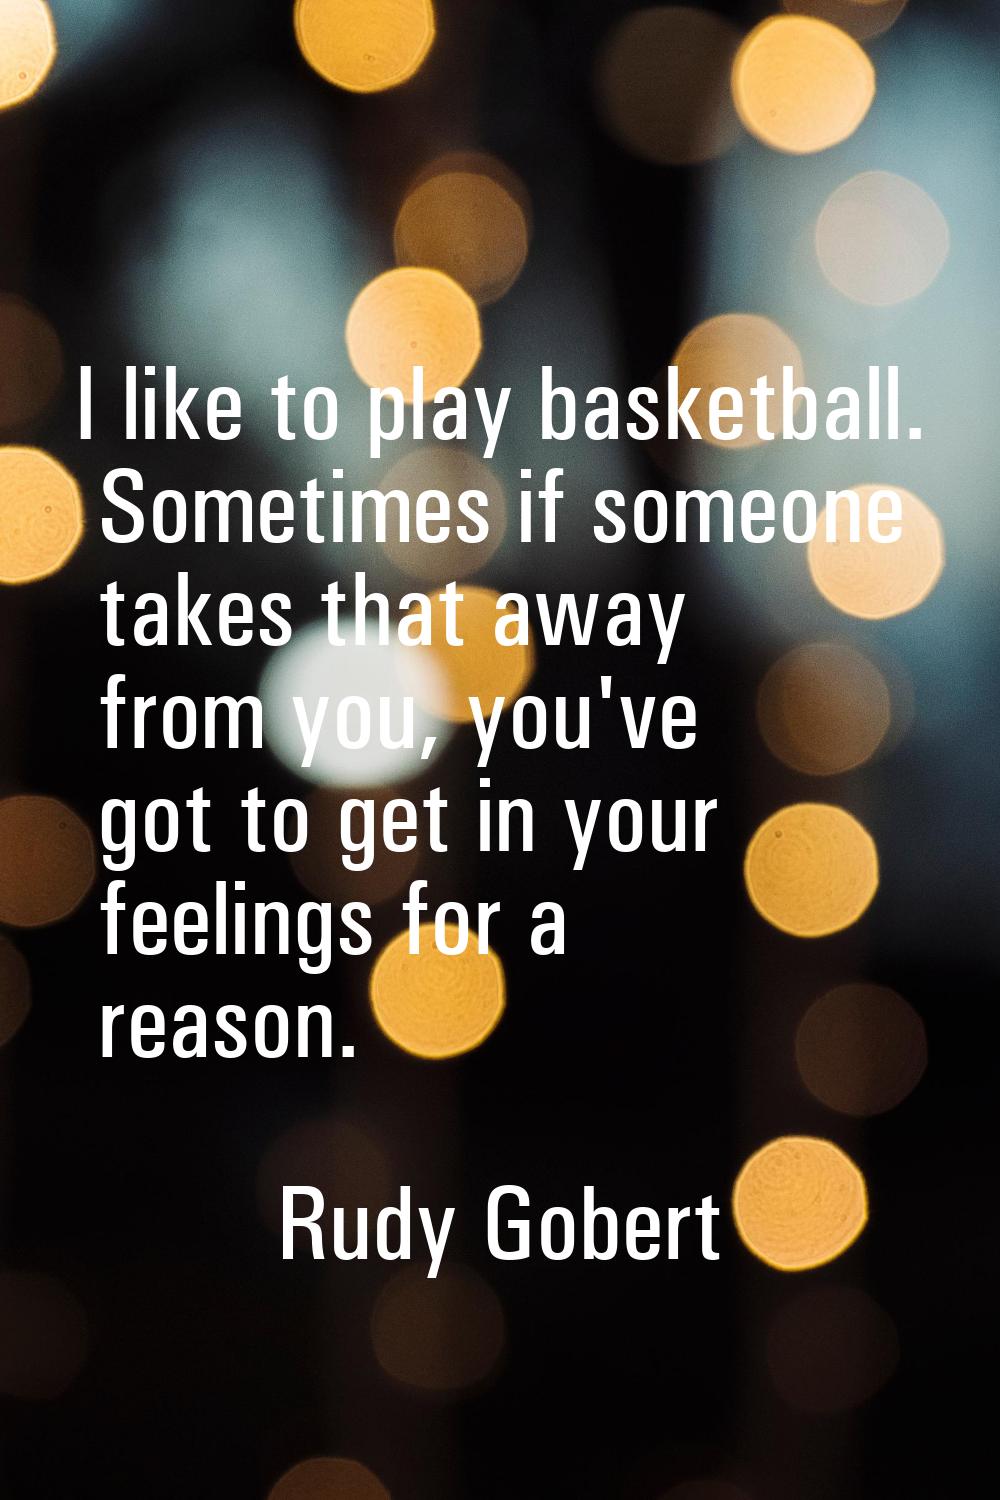 I like to play basketball. Sometimes if someone takes that away from you, you've got to get in your